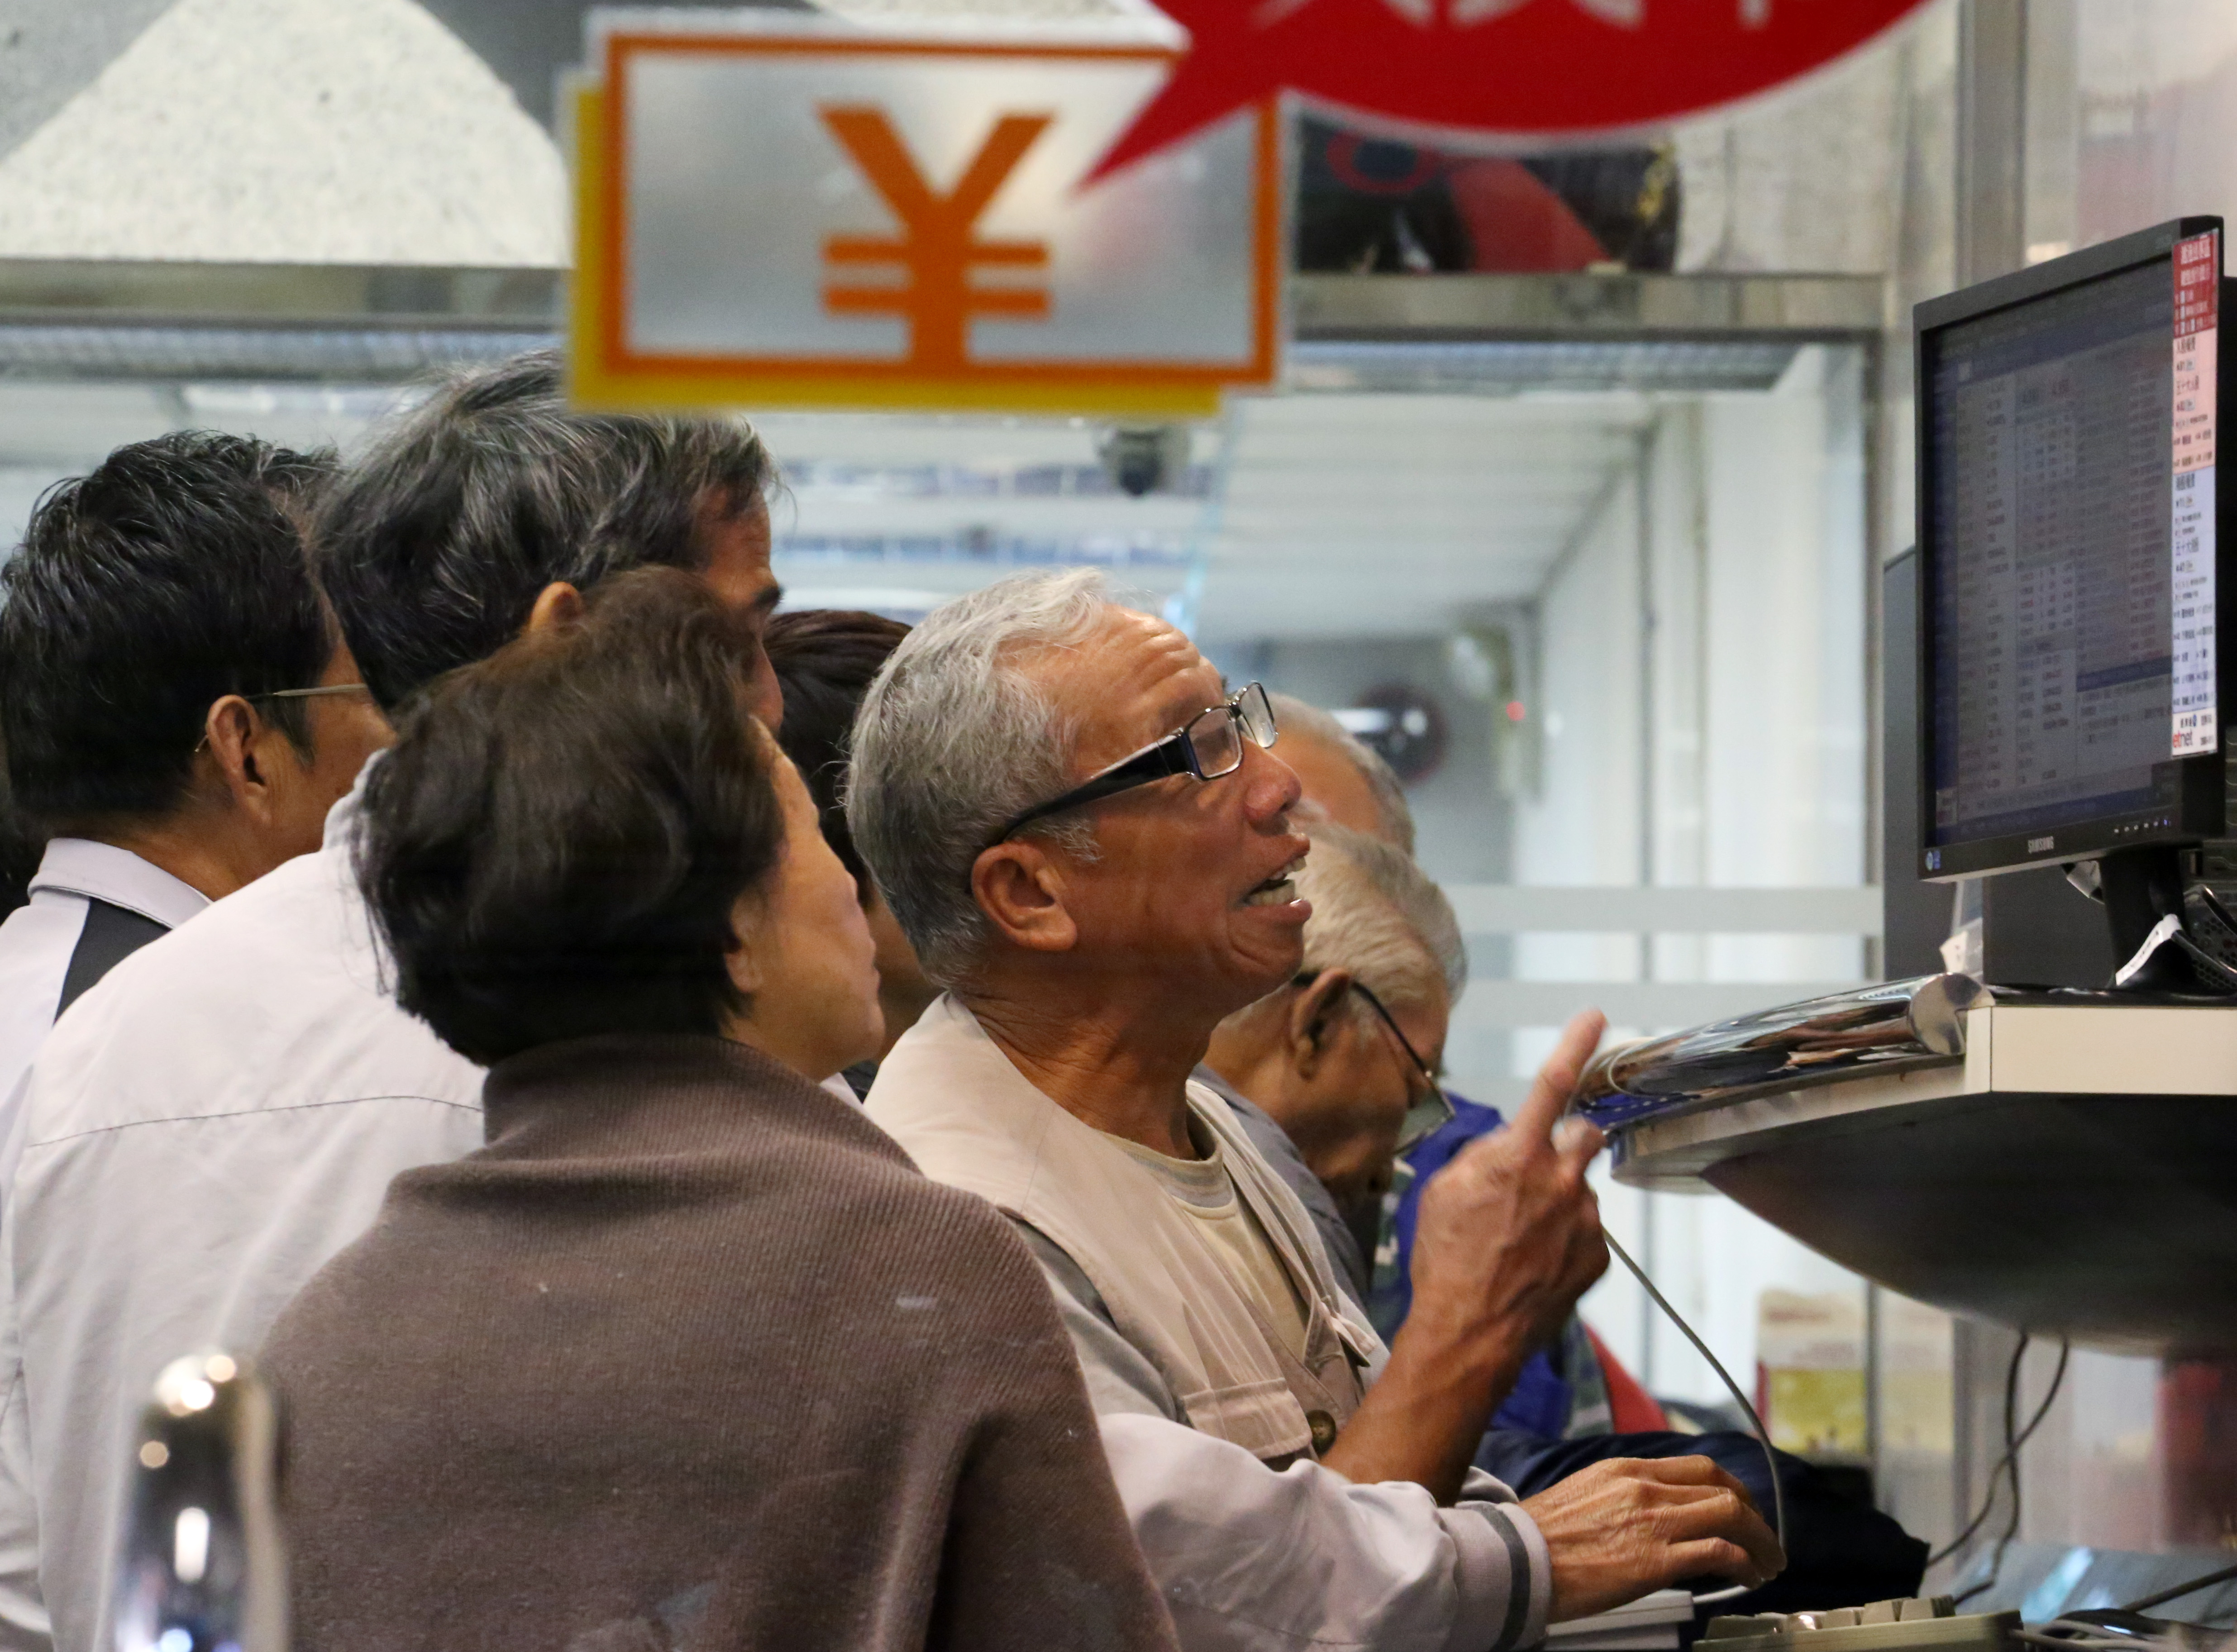 Investors in Hong Kong keep an eye on the stock market as changes in travel habits of Chinese tourists would boost stocks of companies like online travel agencies. Photo: Felix Wong